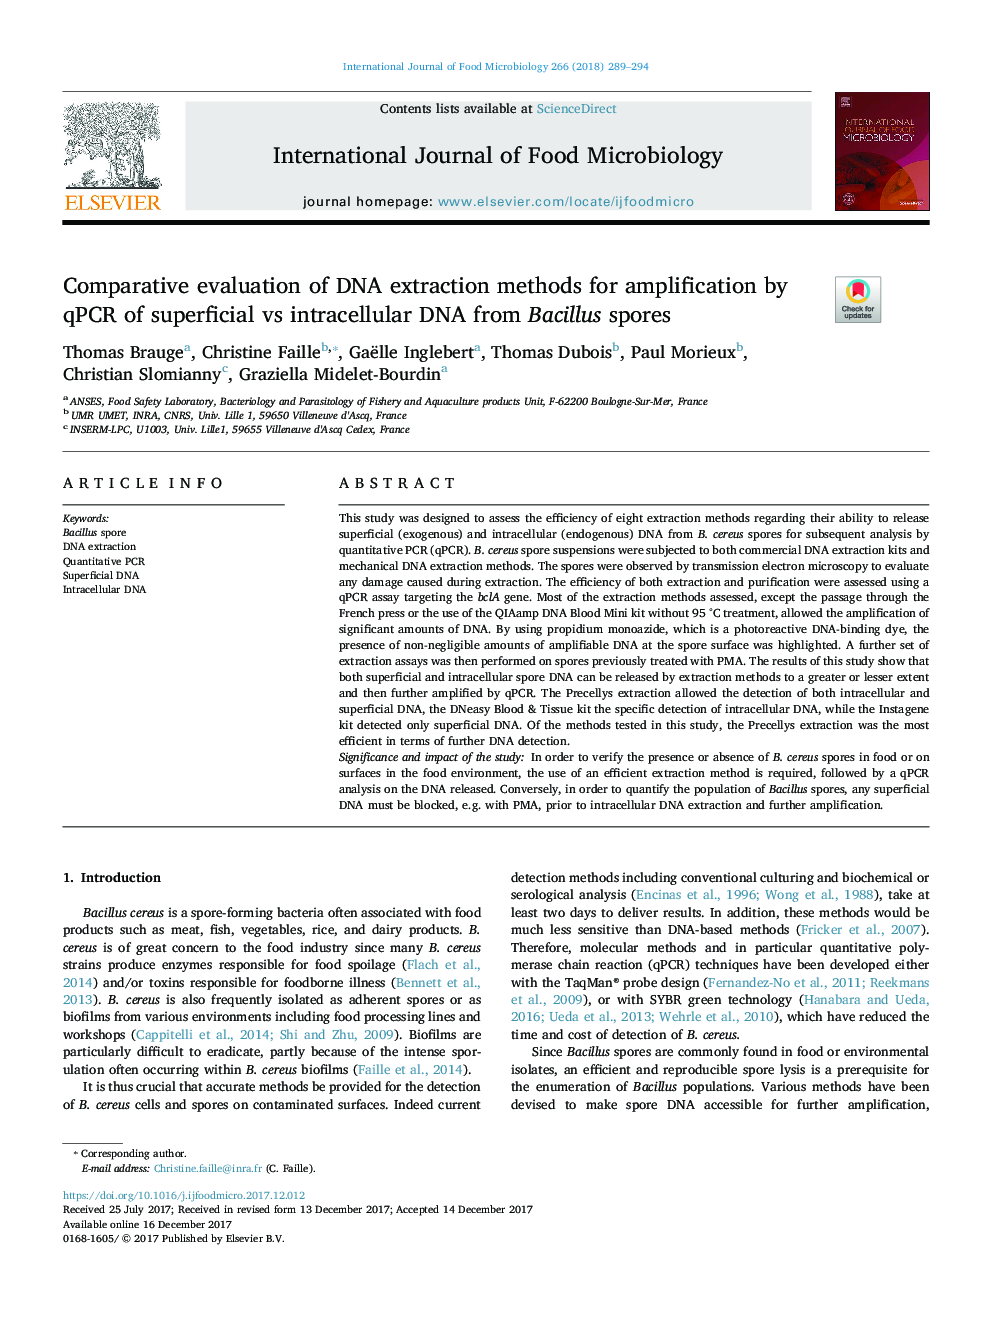 Comparative evaluation of DNA extraction methods for amplification by qPCR of superficial vs intracellular DNA from Bacillus spores